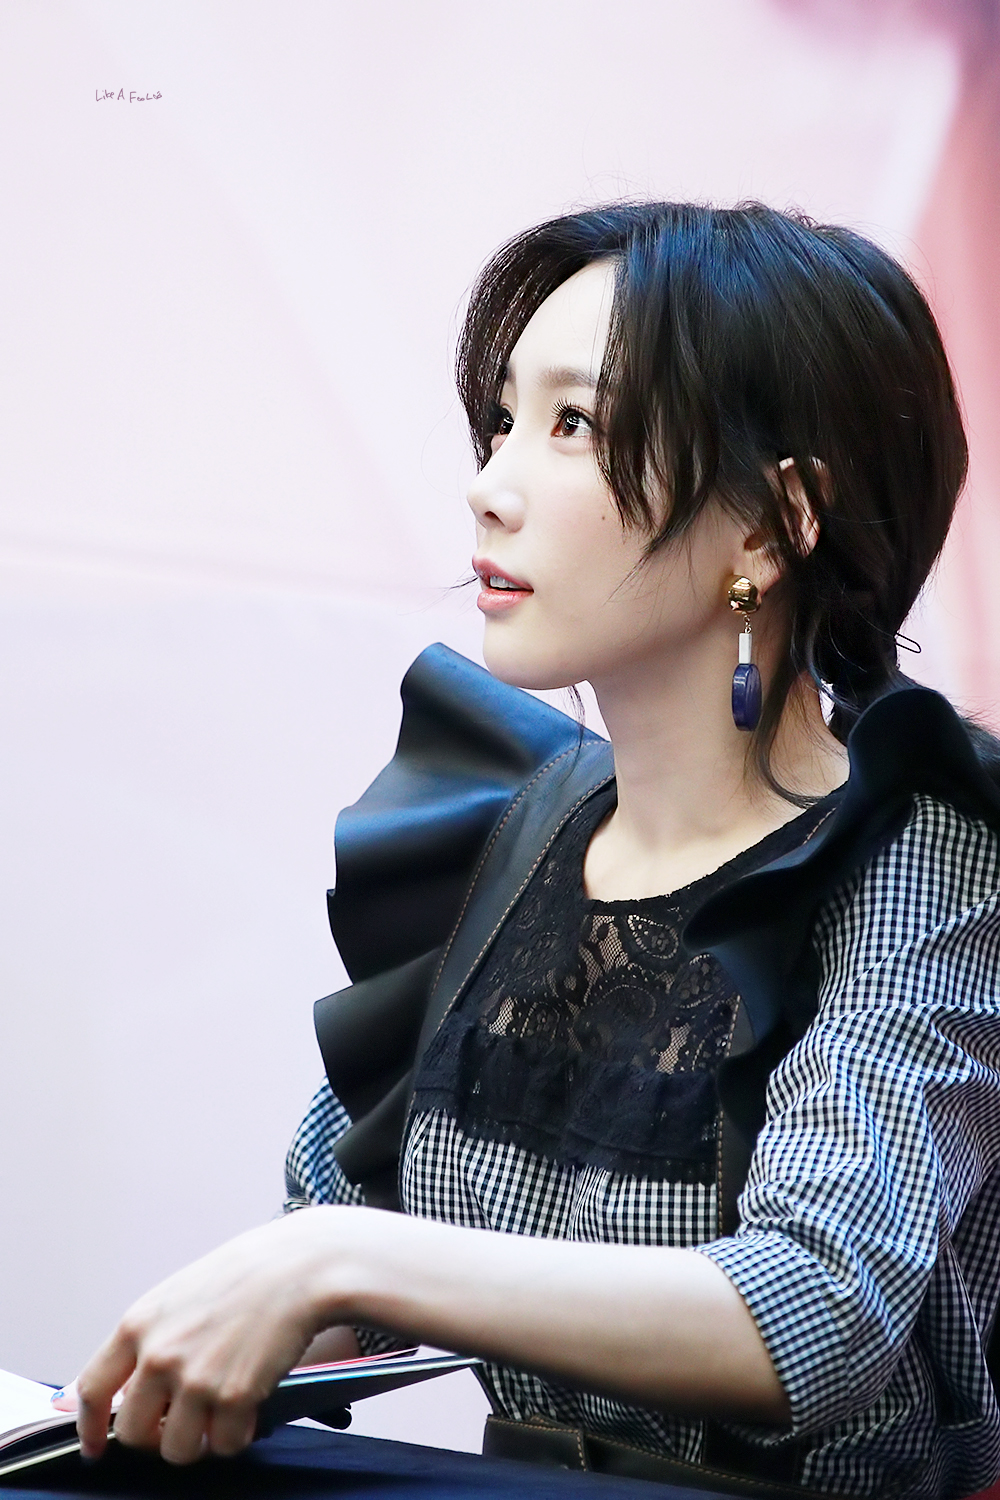 [PIC][16-04-2017]TaeYeon tham dự buổi Fansign cho “MY VOICE DELUXE EDITION” tại AK PLAZA vào chiều nay  - Page 2 227D053458F35F9D377D0C